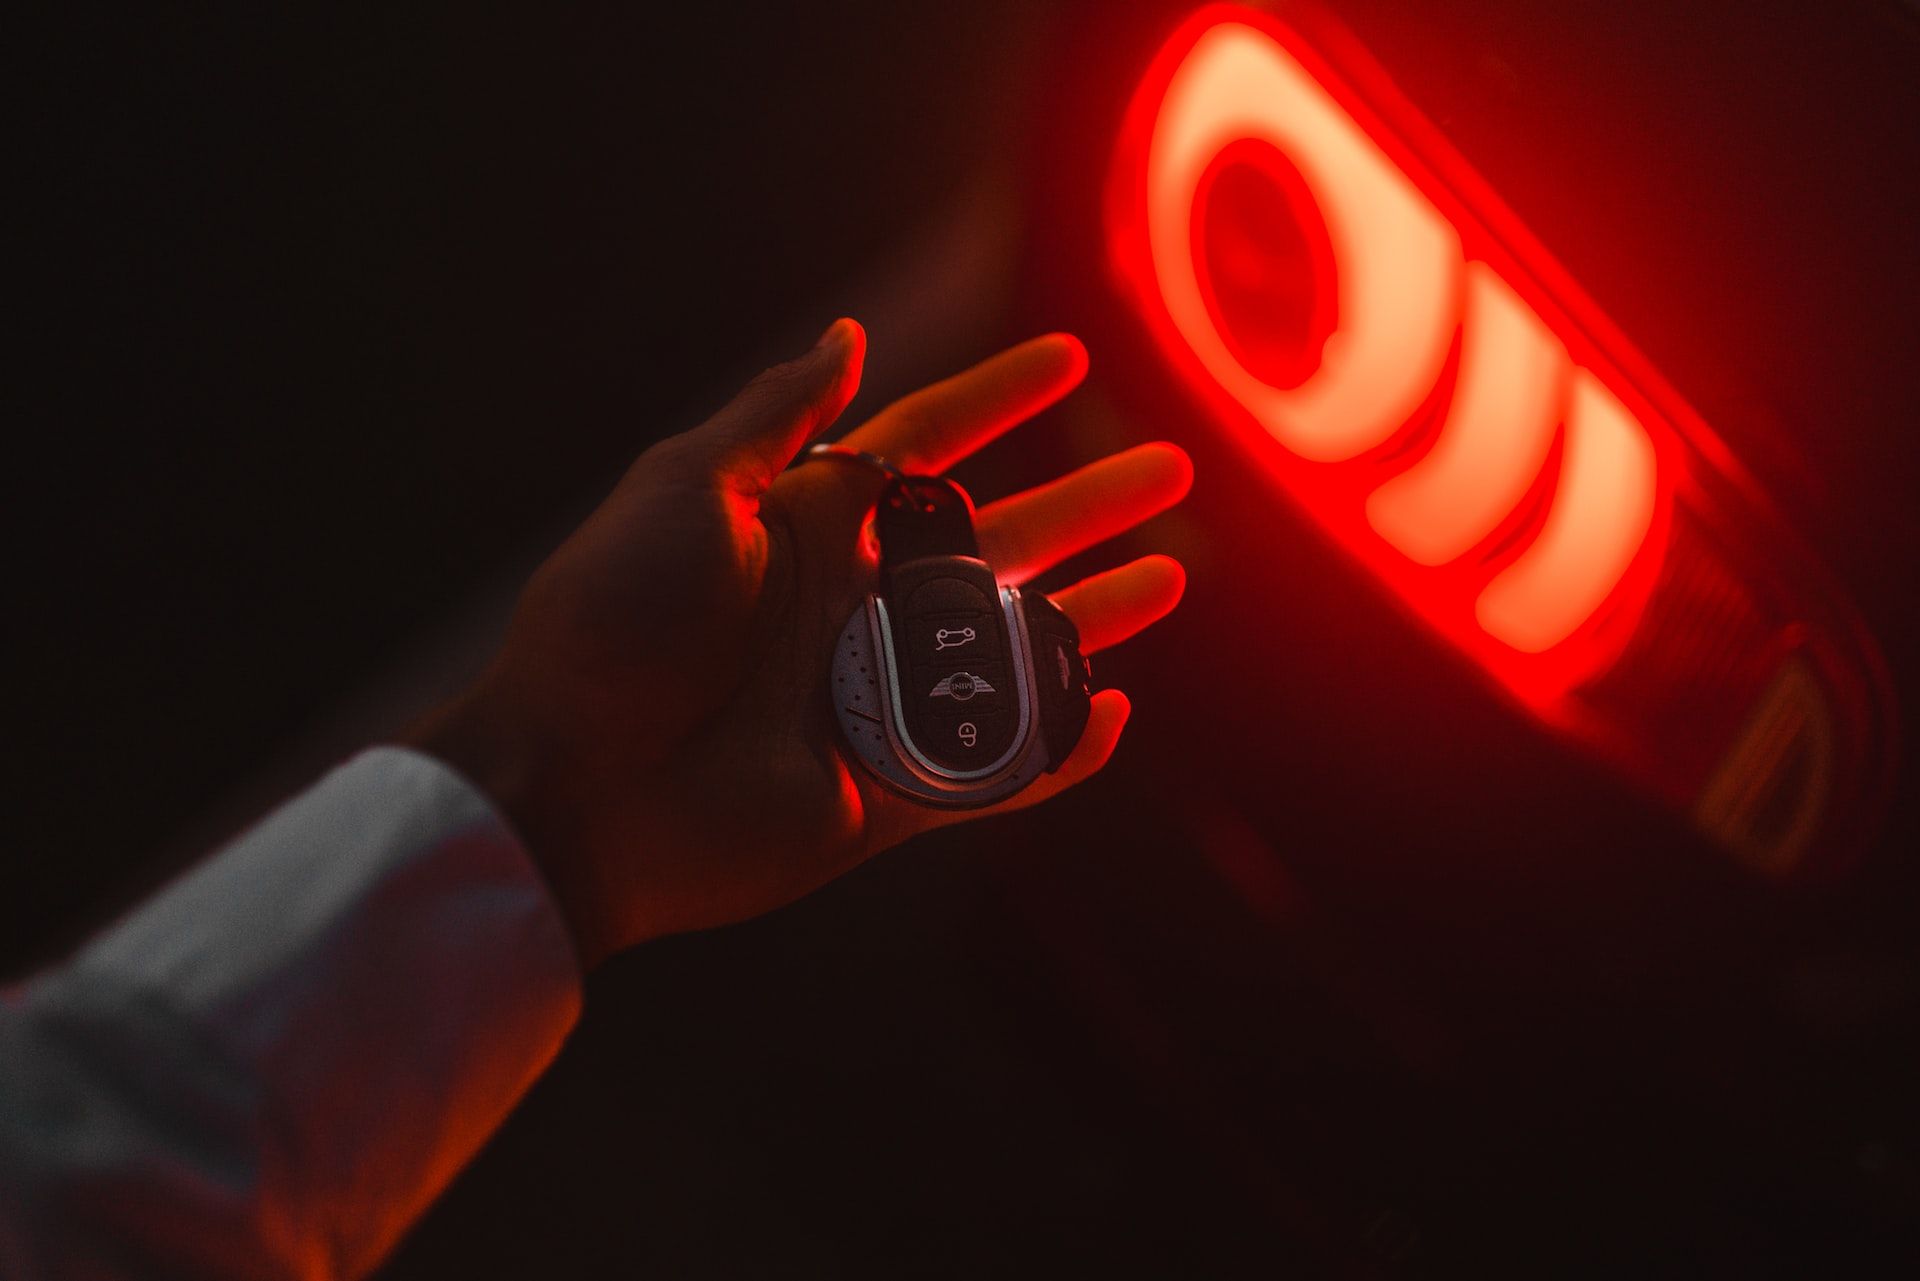 Person holding a car smart key against a red light